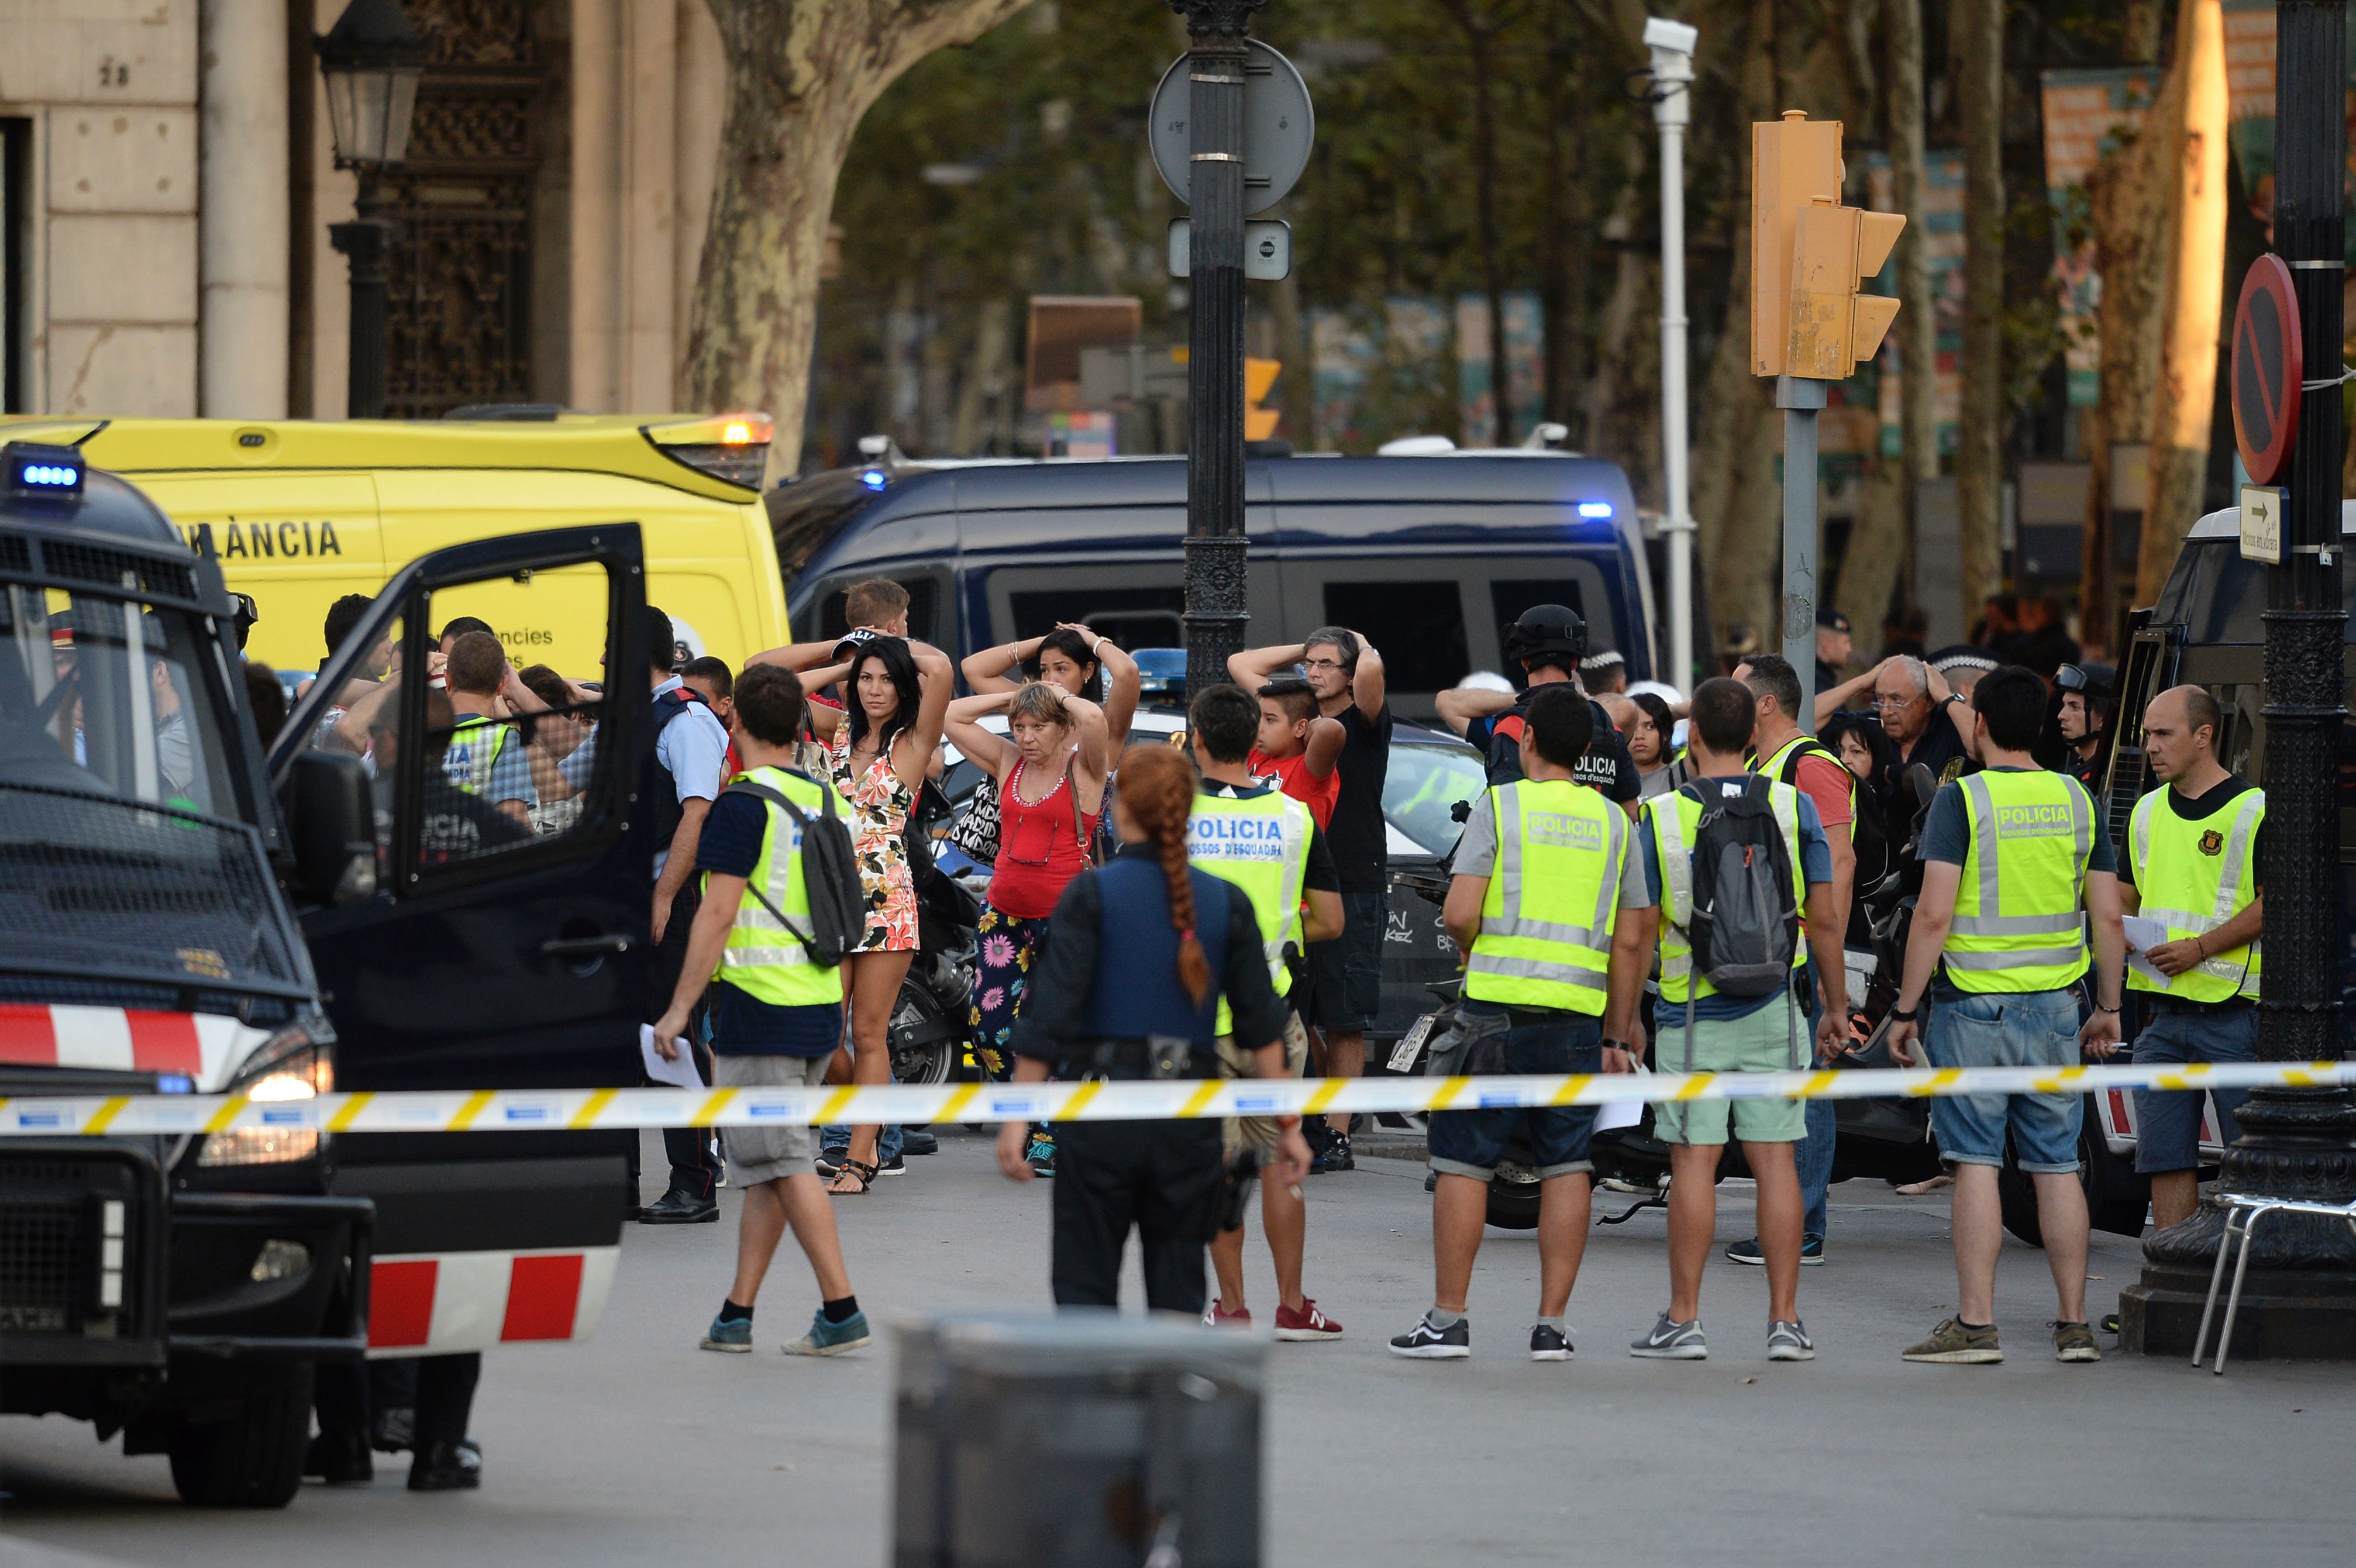 Police identify onlookers on the Rambla in Barcelona